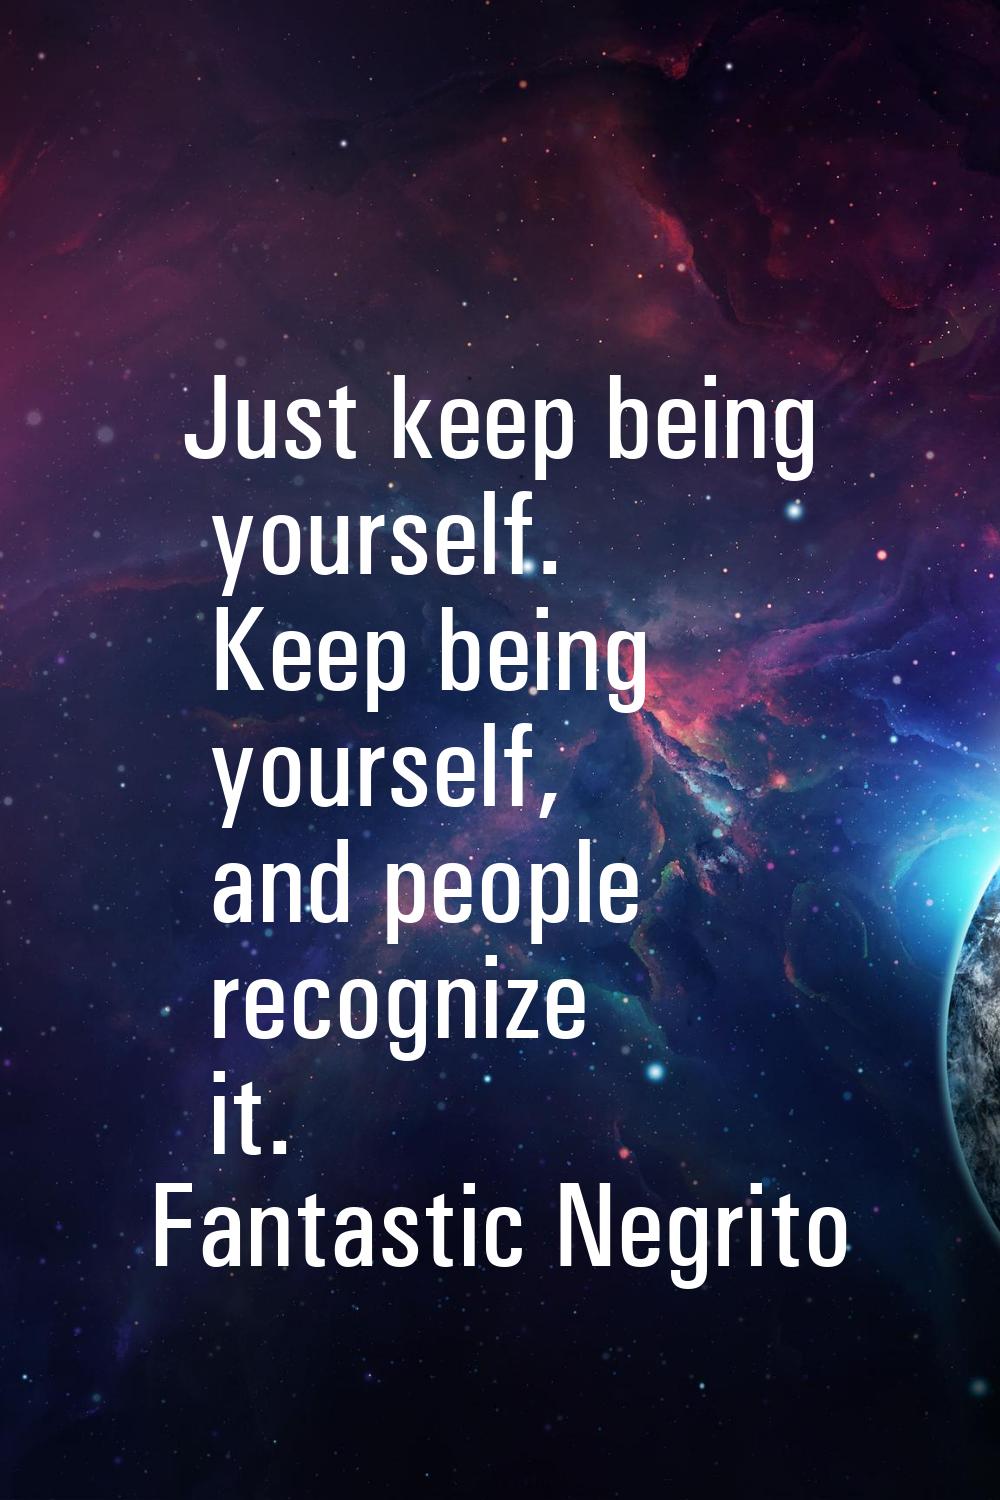 Just keep being yourself. Keep being yourself, and people recognize it.